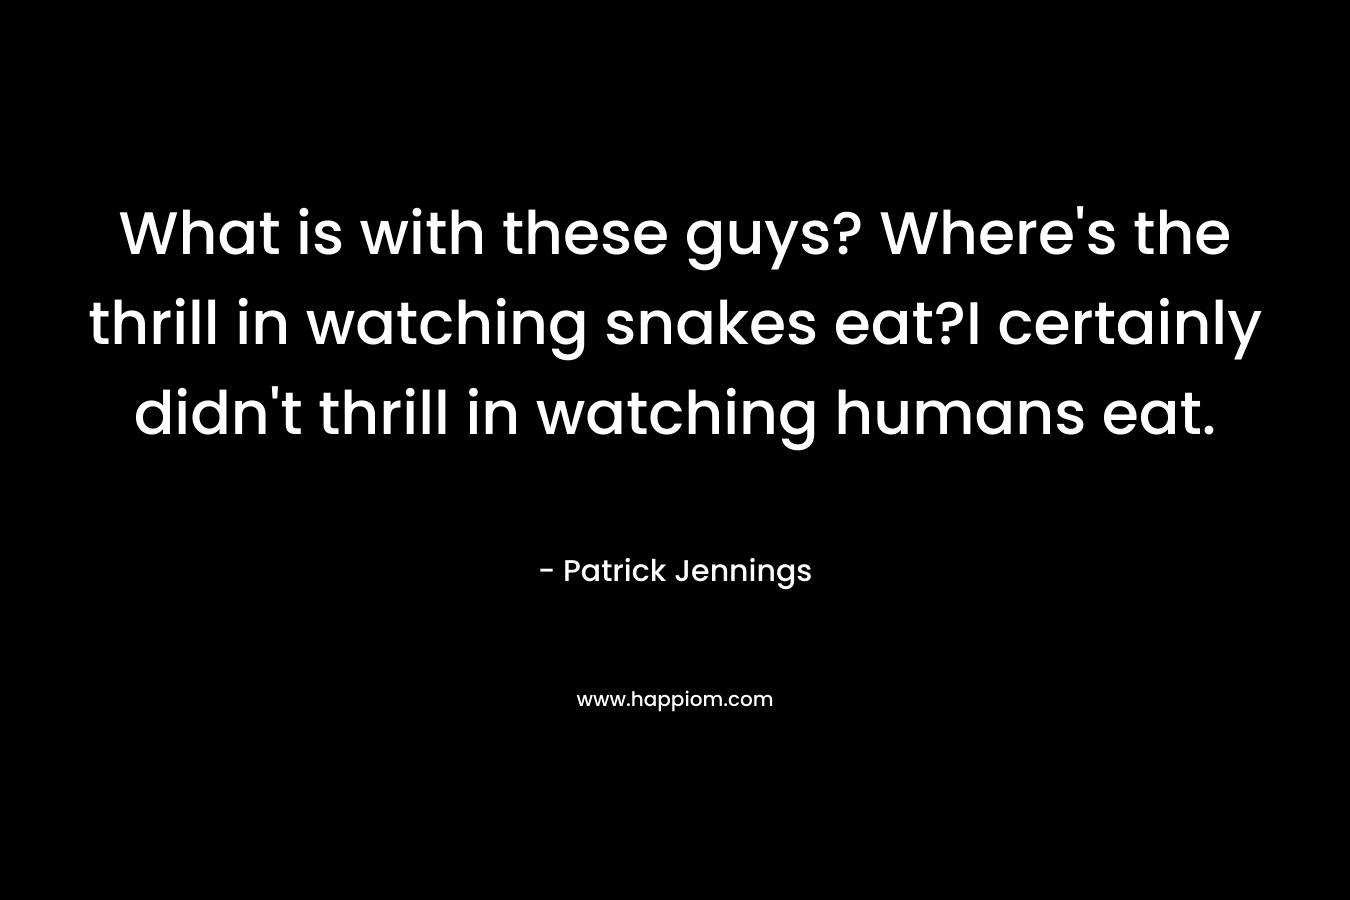 What is with these guys? Where's the thrill in watching snakes eat?I certainly didn't thrill in watching humans eat.